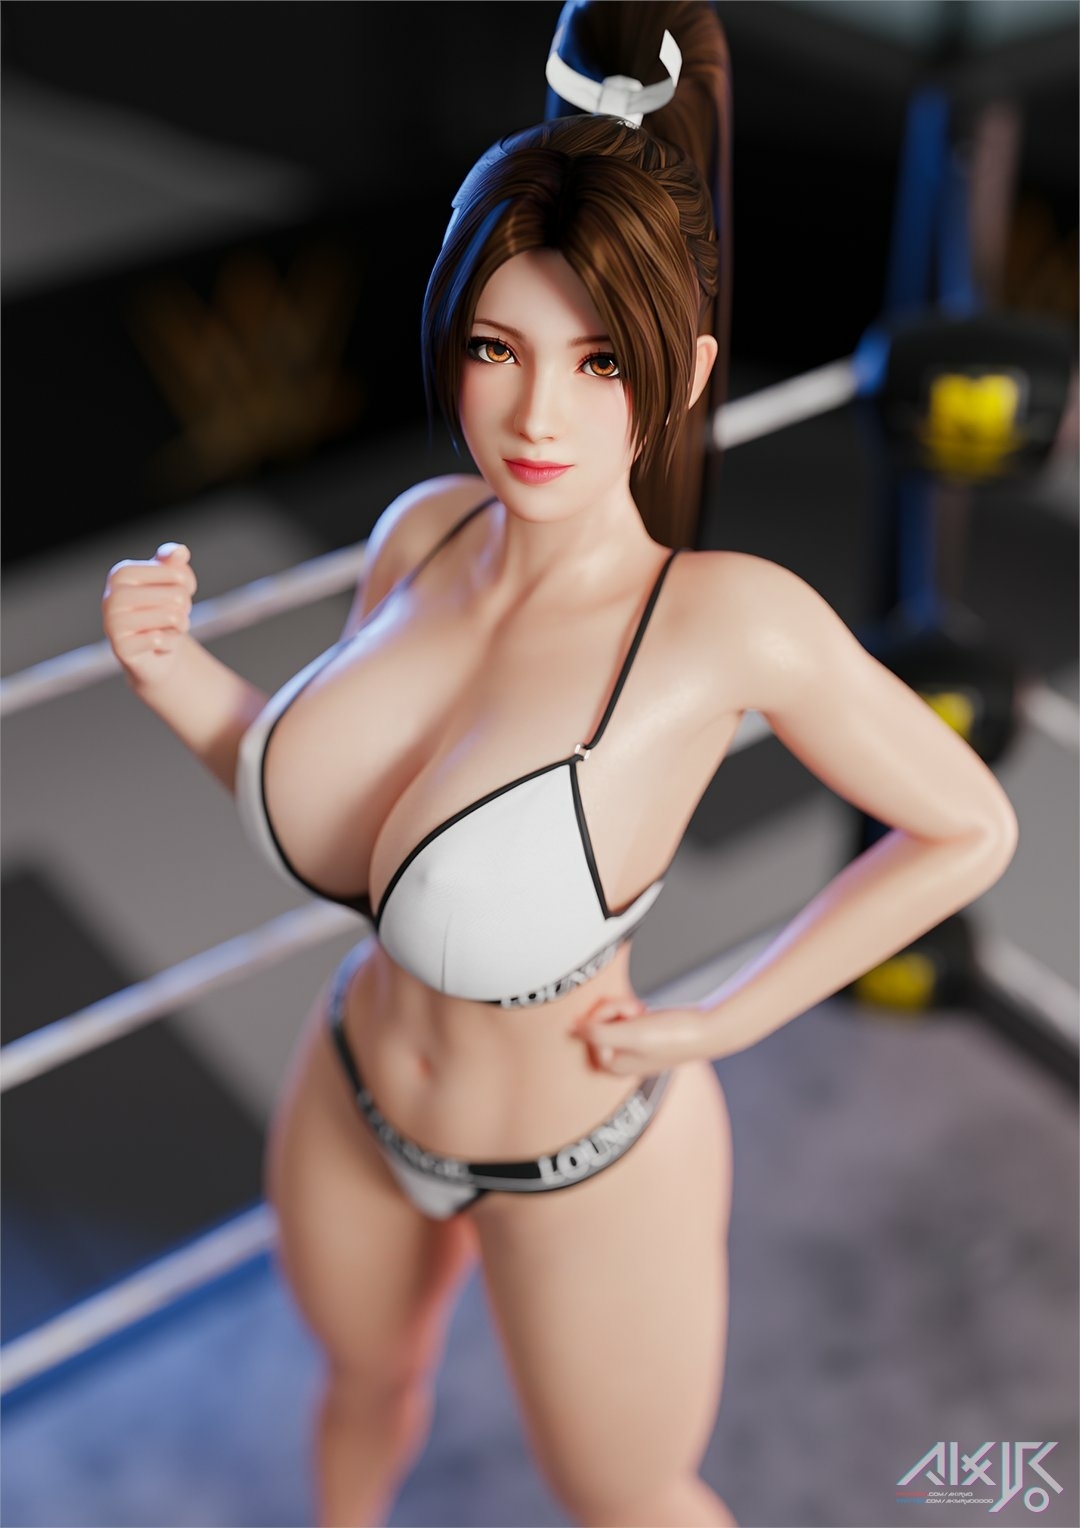 The fight...begins. 😈 Dead Or Alive Mai Shiranui 3d Porn 3d Girl Nsfw Sexy Big Tits Big Breasts Hot Perfect Body Solo Outfit